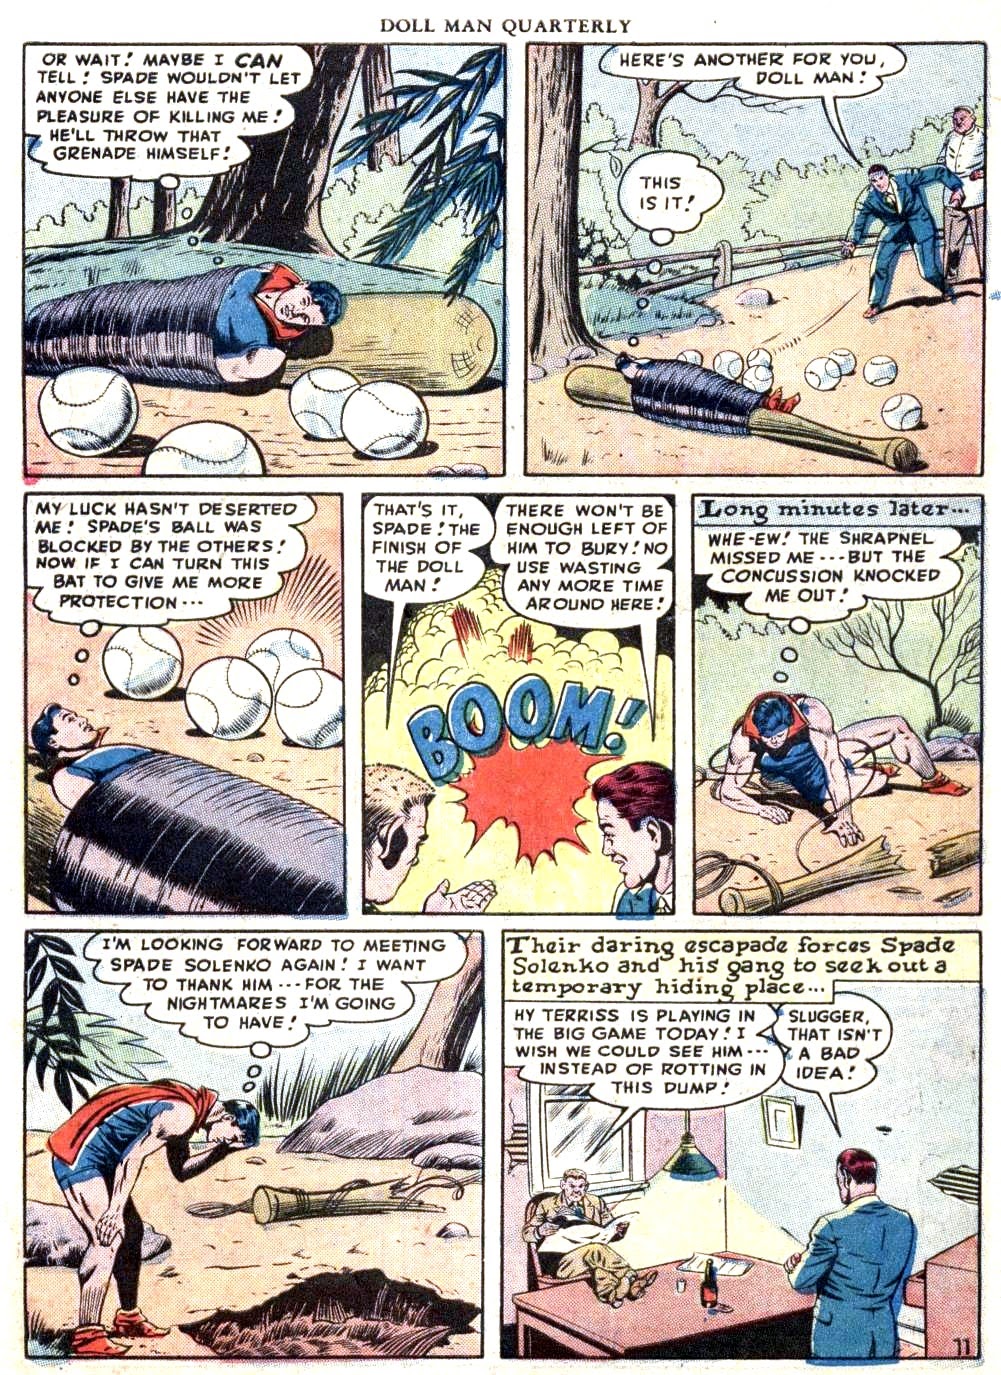 Read online Doll Man comic -  Issue #13 - 46